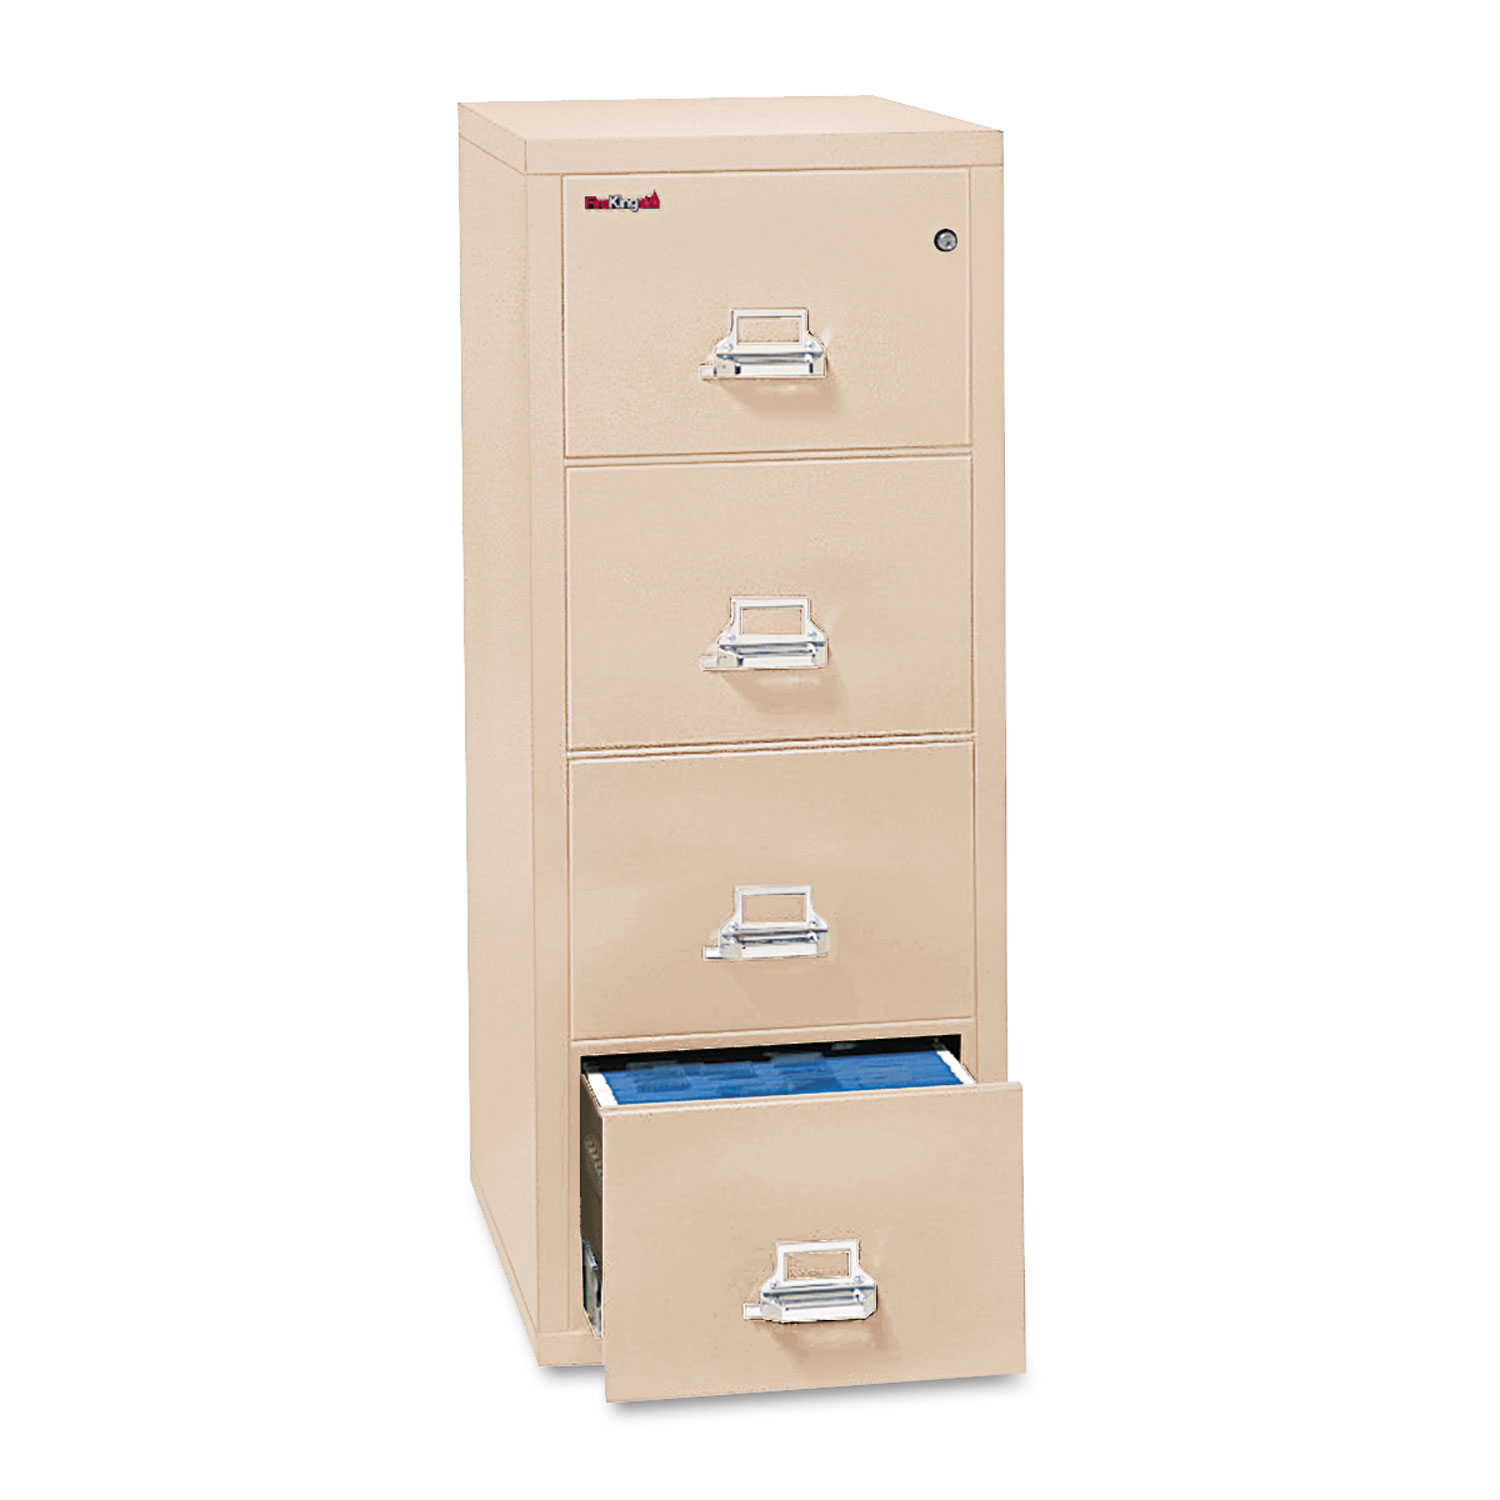  FireKing 4-1831-CPA Four-Drawer Vertical File, 17.75w x 31.56d x 52.75h, UL 350° for Fire, Letter, Parchment (FIR41831CPA) 